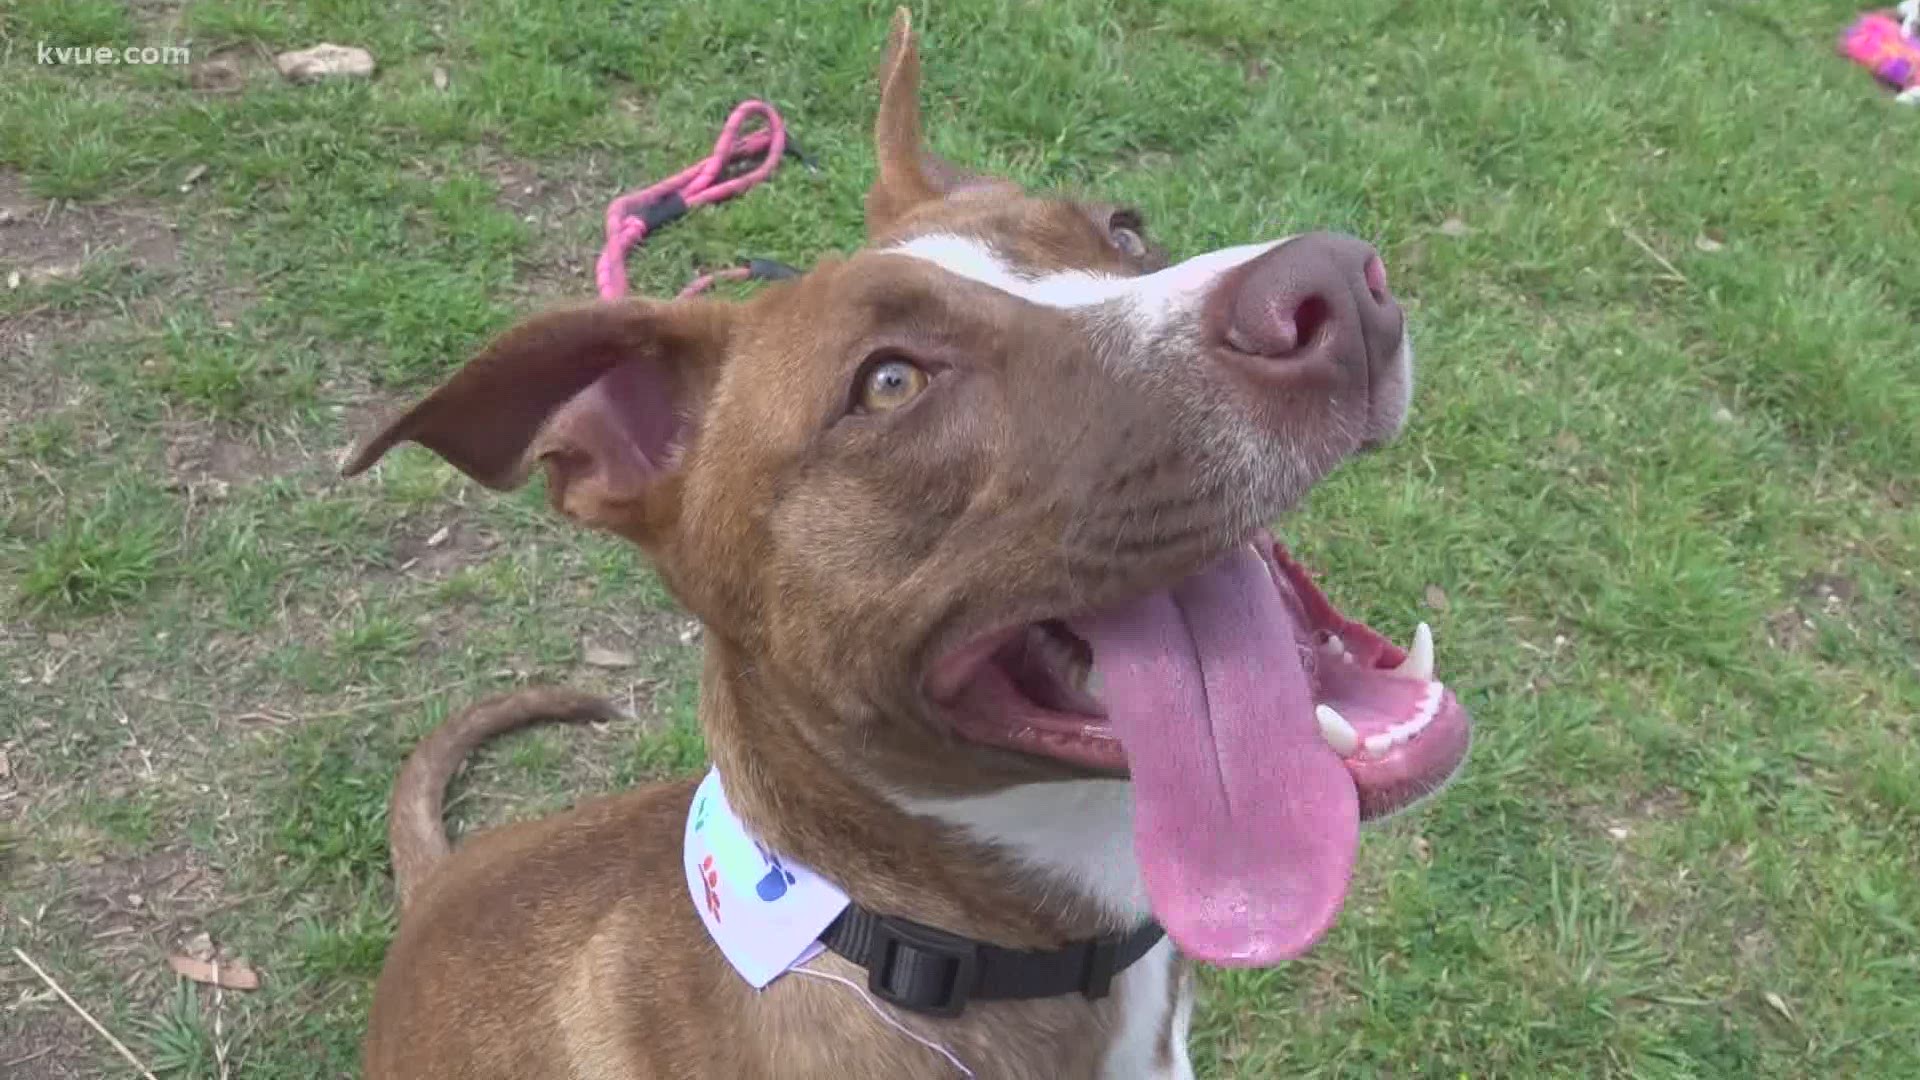 Mercy is almost two years old, gets along well with other dogs and loves kids. She would be the perfect addition to any family!